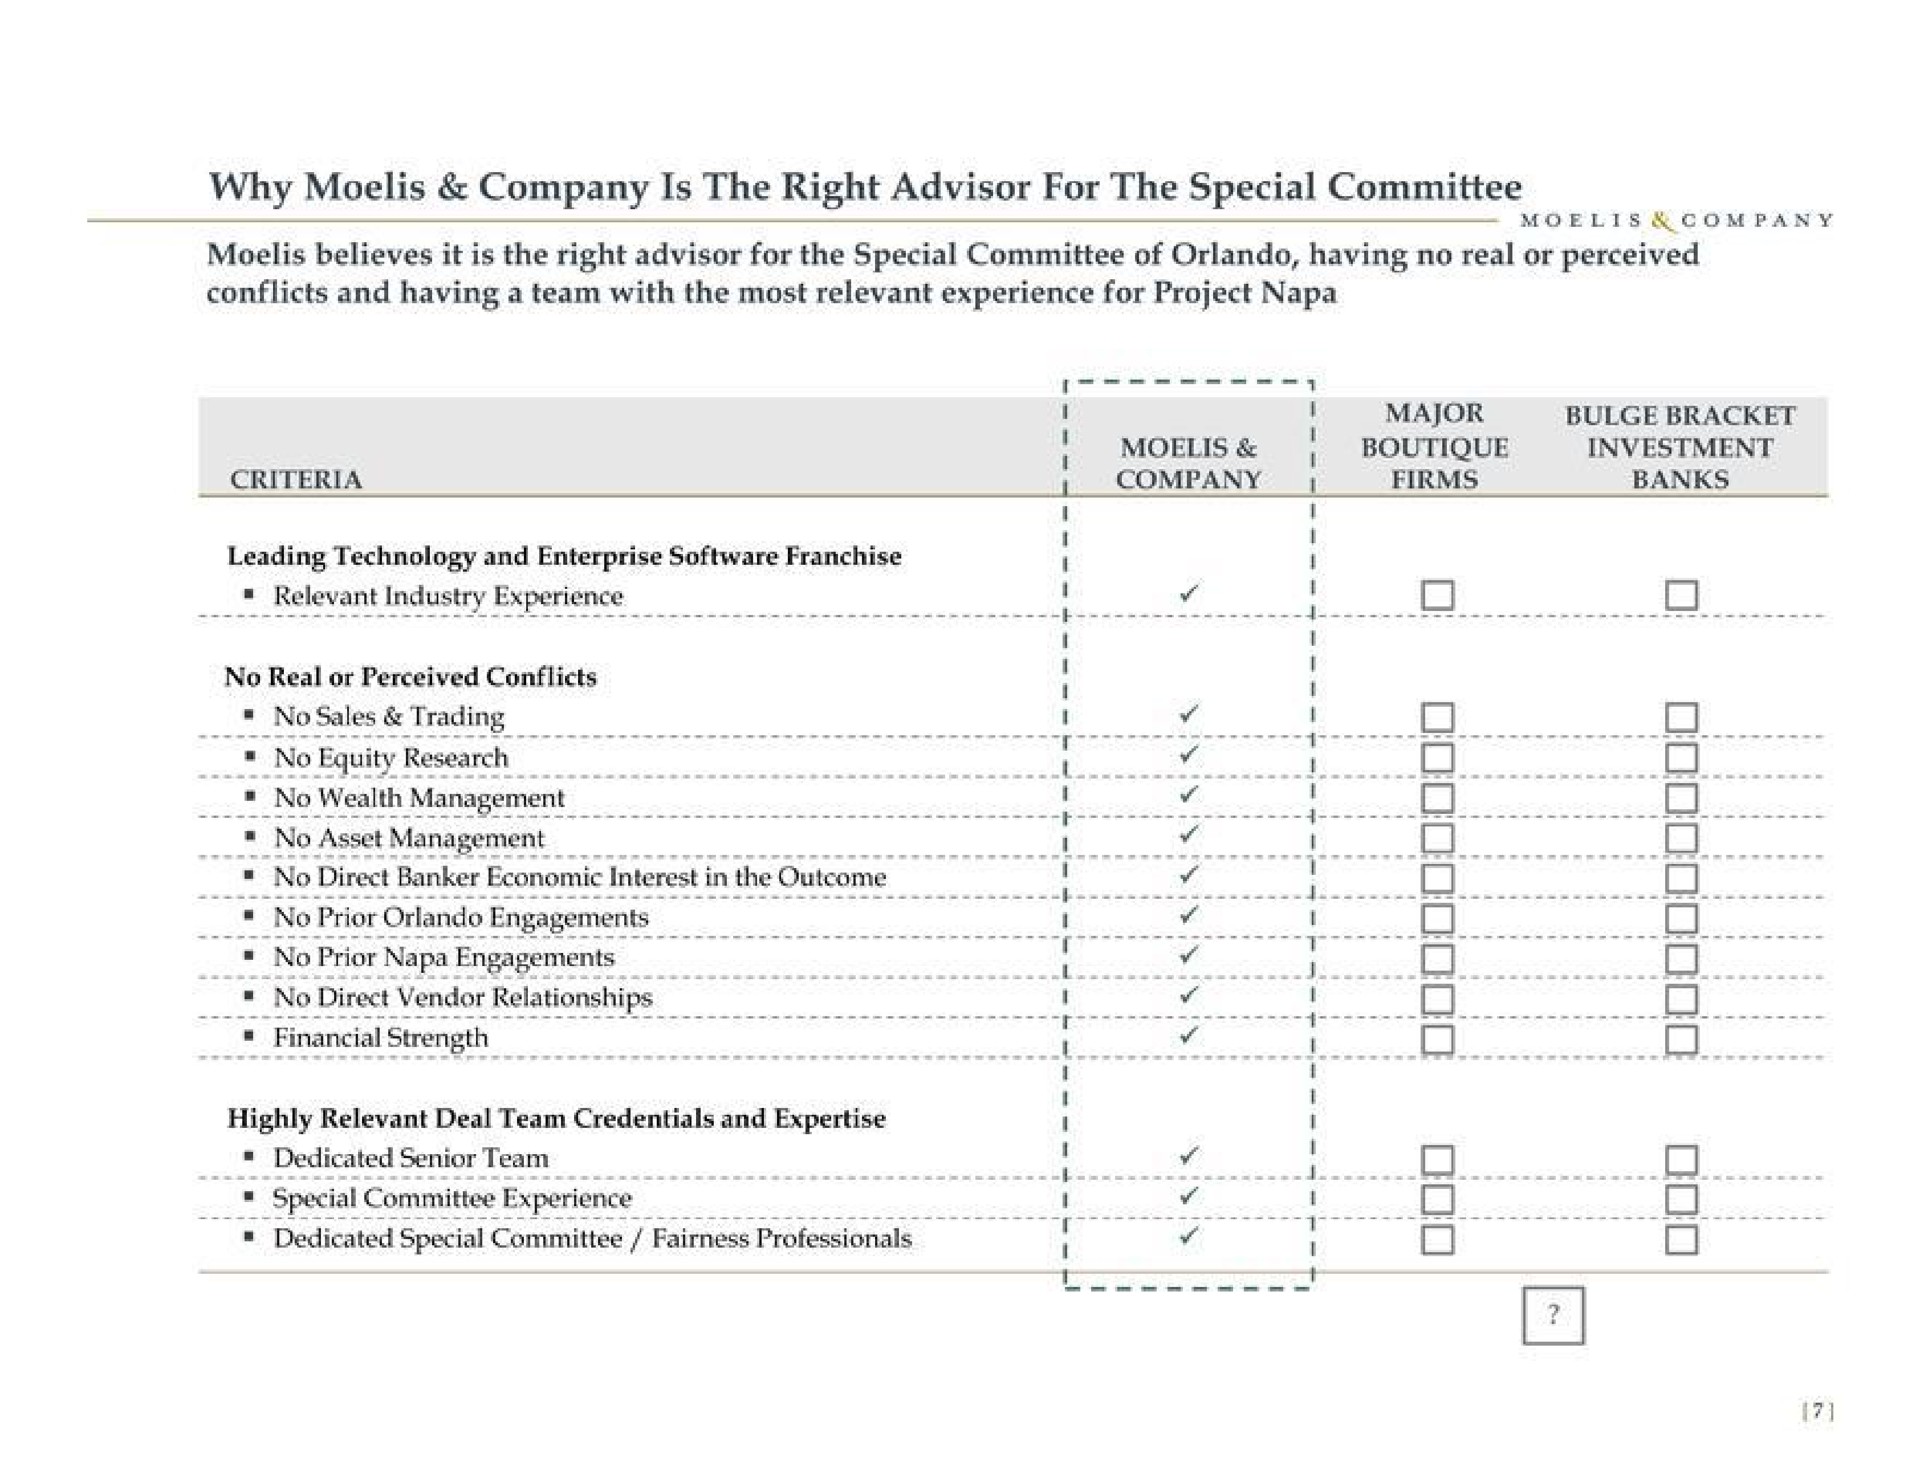 why company is the right advisor for the special committee conflicts and having a team with the most relevant experience for project napa relevant industry experience trading no equity research a be we cee so no direct banker economic interest in the outcome no direct vendor relationships i ogee des urease bice do i near bases scat i special committee experience gie sees bed | Moelis & Company